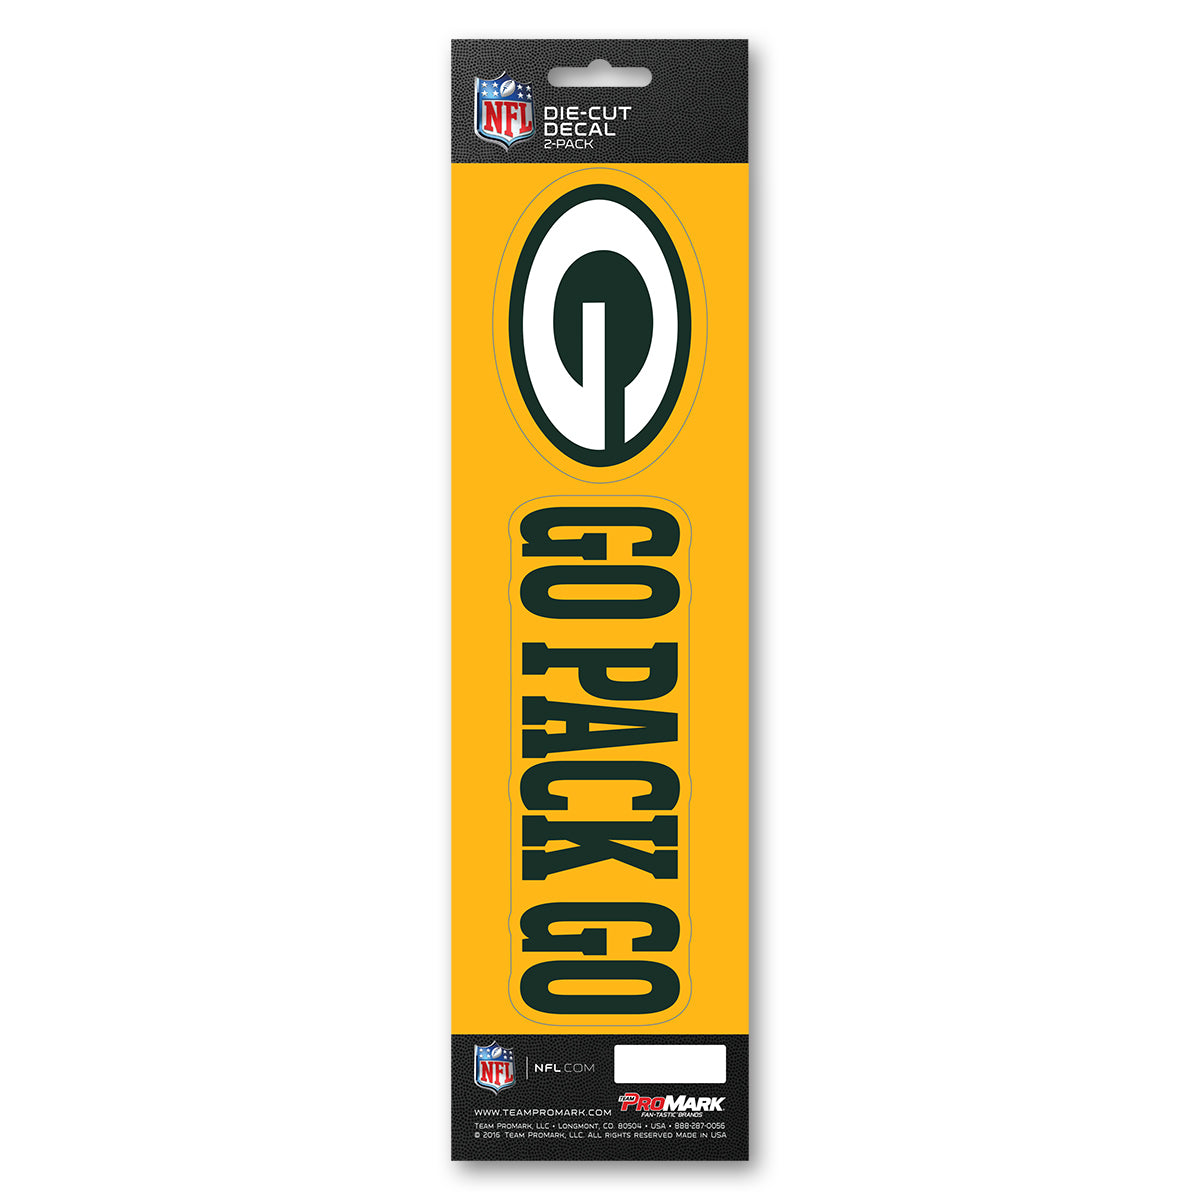 Packers Slogan Decal